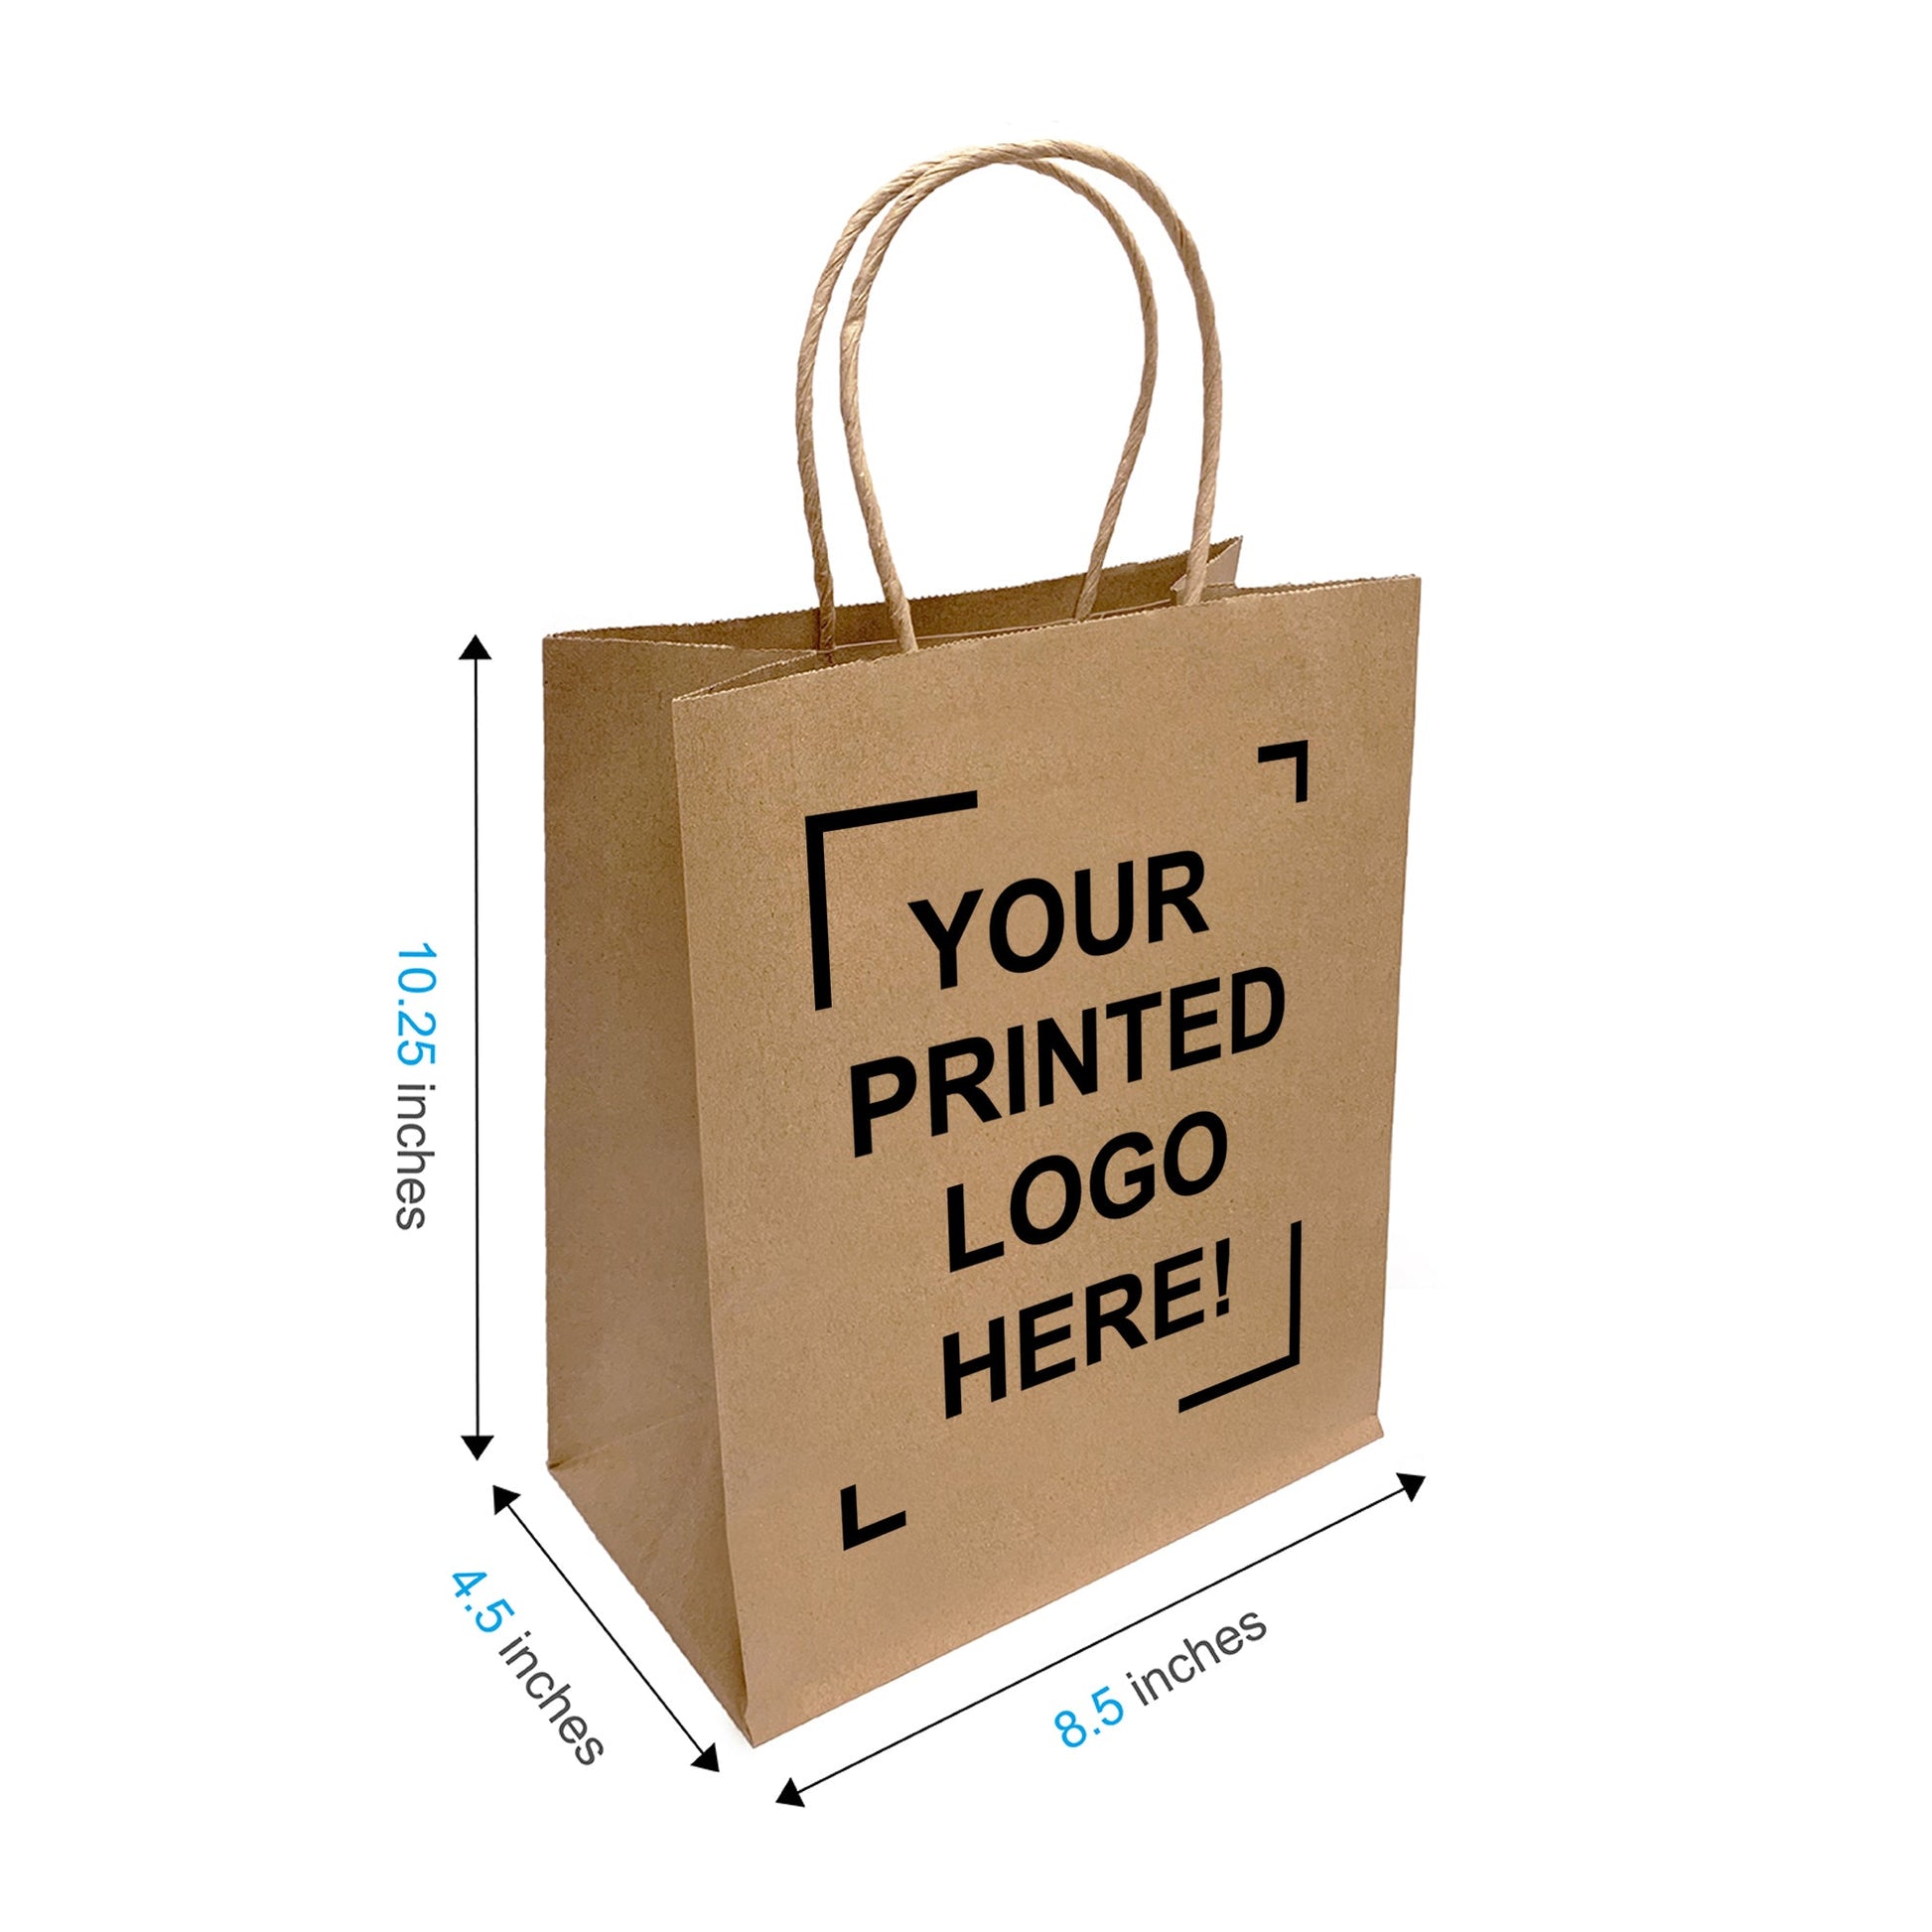 250 Pcs, Cub, 8.5x4.5x10.25 inches, Kraft Paper Bags, with Twisted Handle, Full Color Custom Print